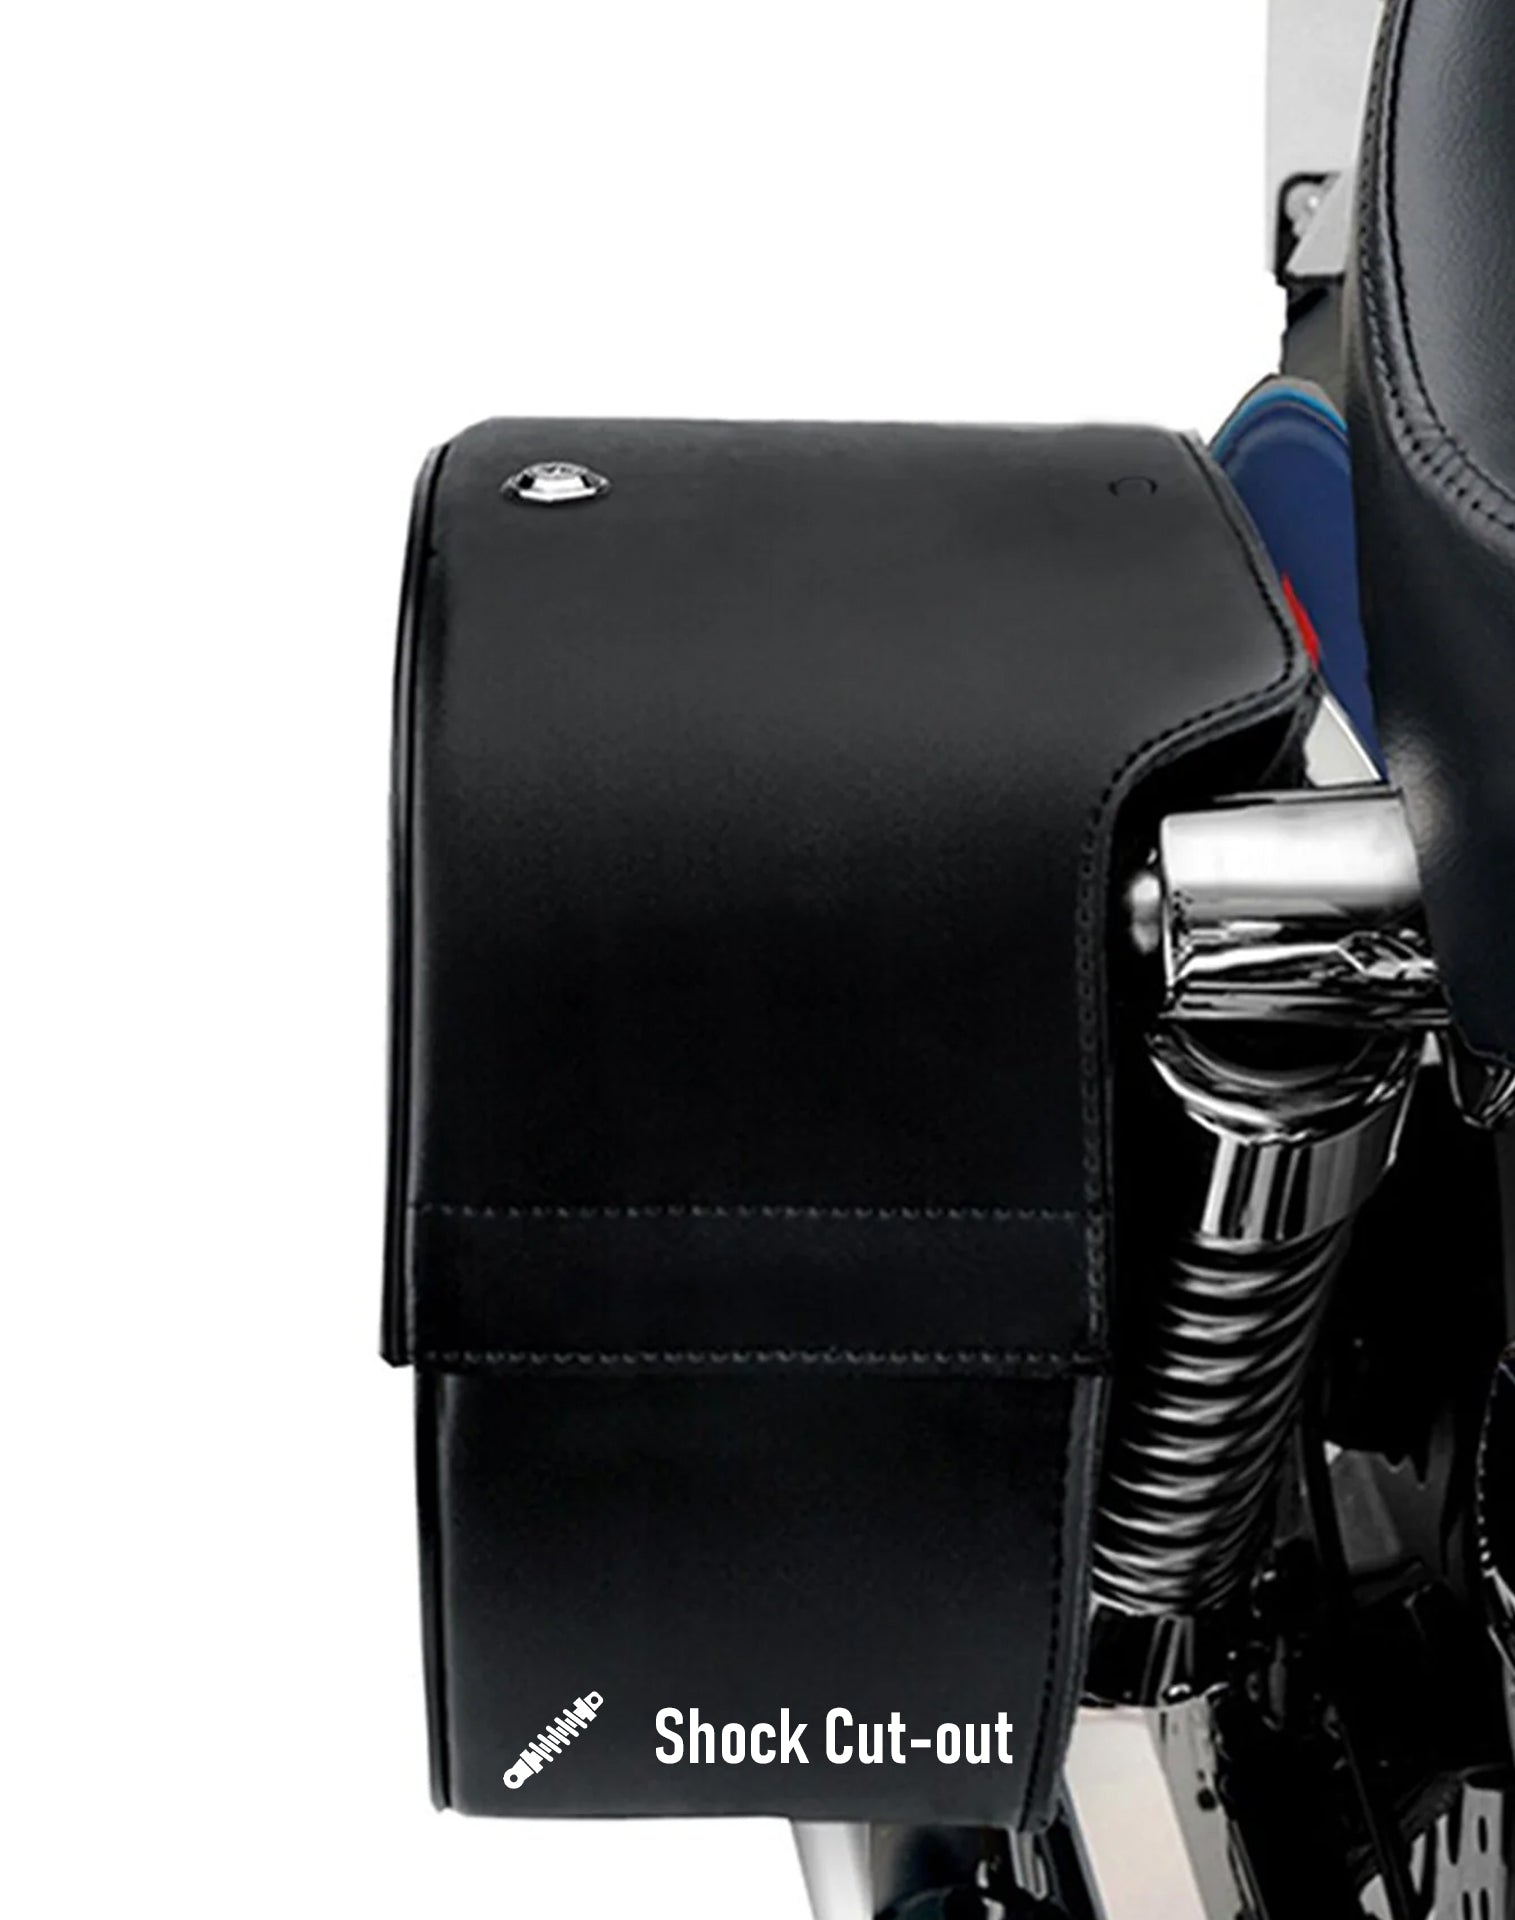 26L - Baelor Large Shock-Cutout Leather Saddlebags for Harley Sportster 883 Iron XL883N